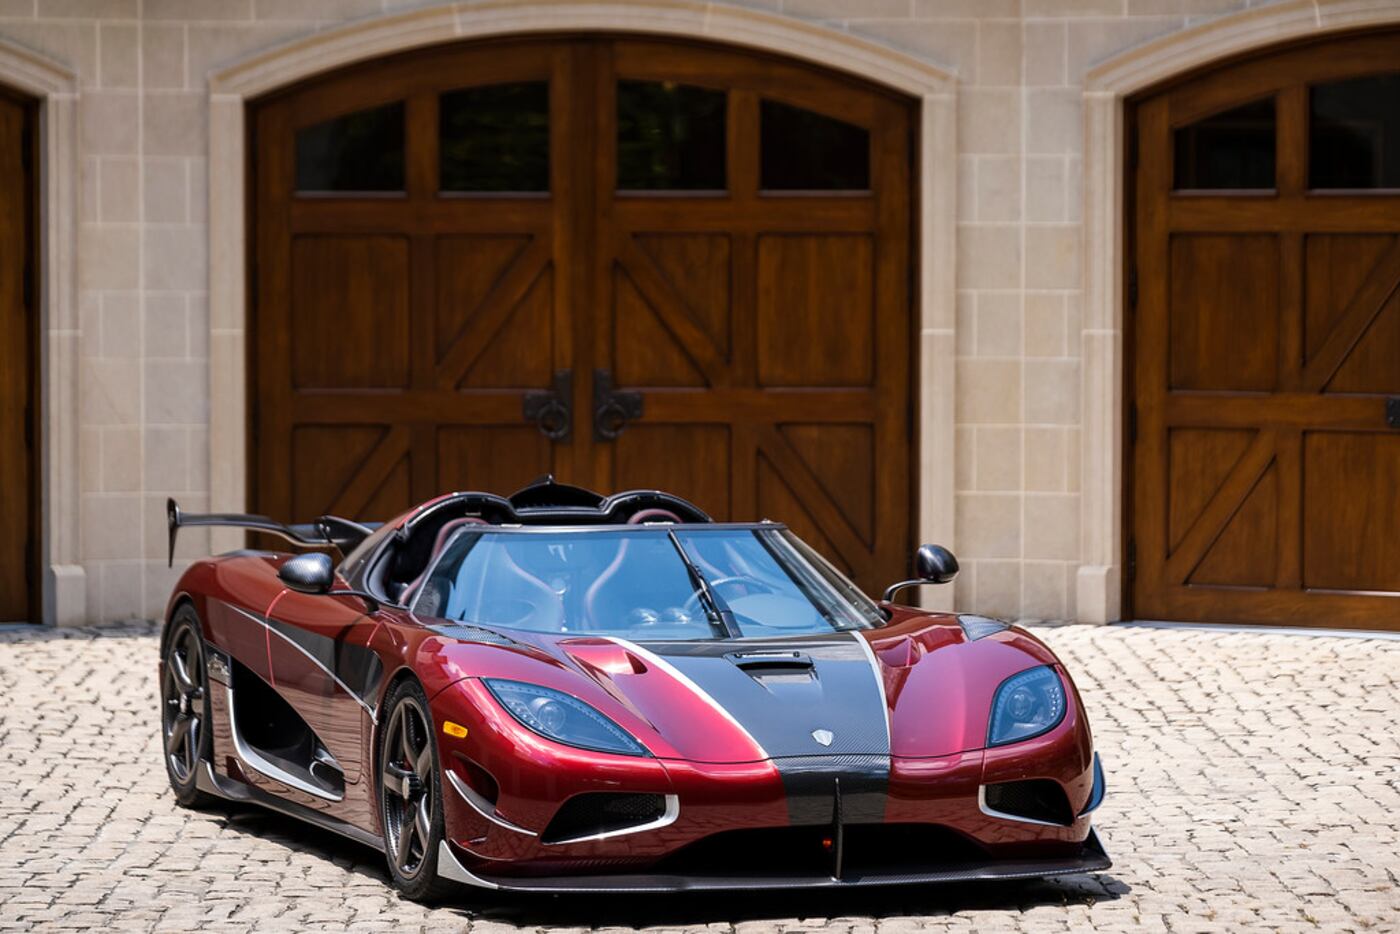 A Koenigsegg Agera RS was produced from 2015 to 2018.